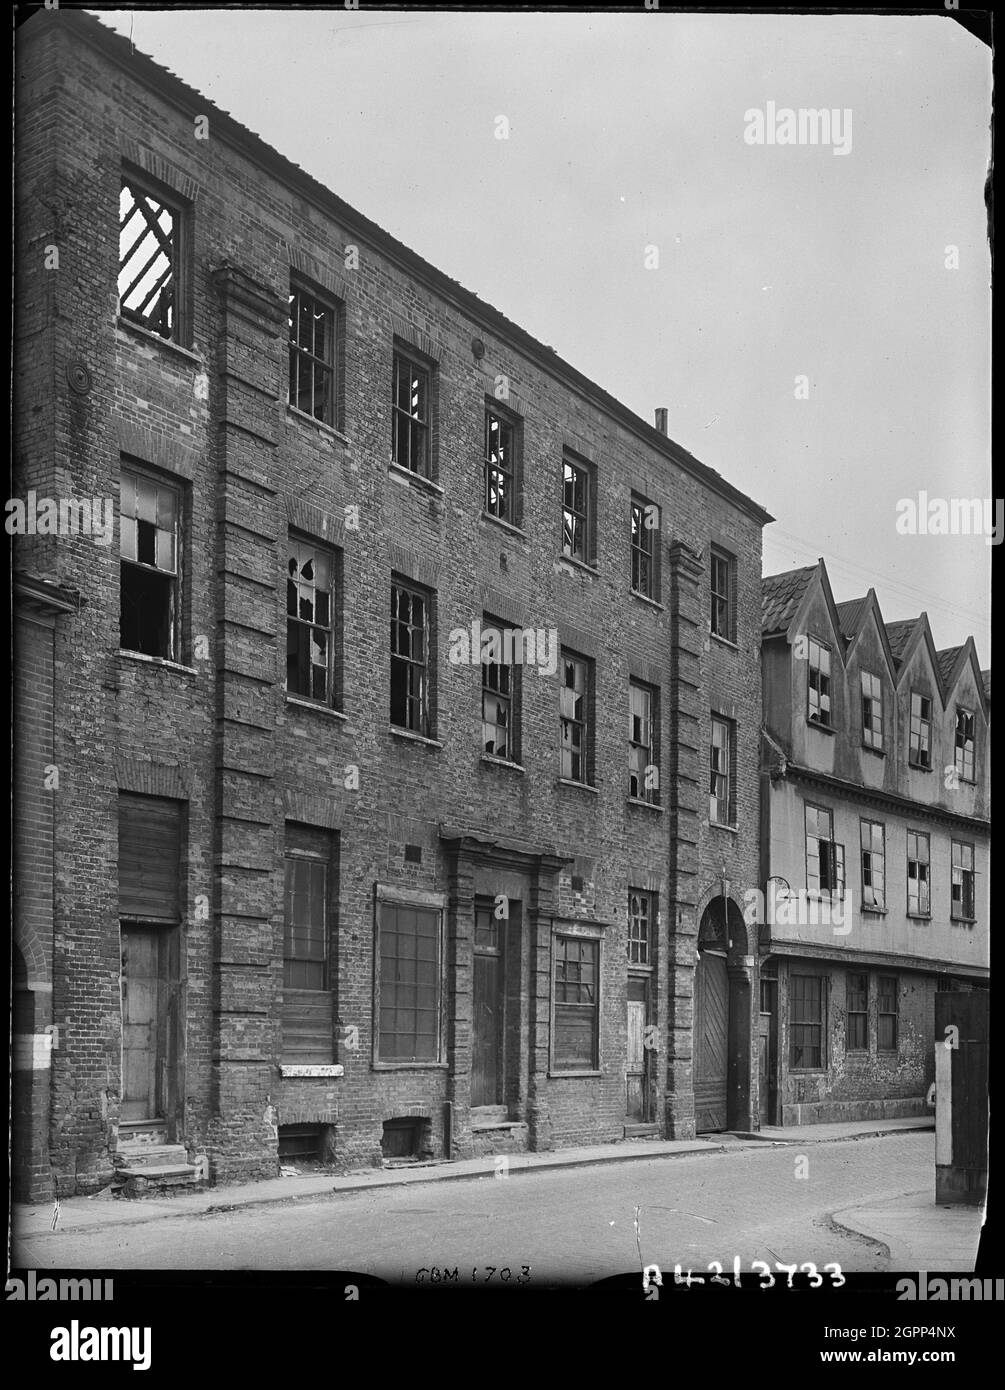 Norfolk Iron Works, Coslany Street, Norwich, Norfolk, 1942. The front elevation of 24 Coslany Street showing bomb damage, with number 22 visible in the background. Numbers 22 and 24 Coslany Street formed part of the Norfolk Iron Works, premises of Barnard's Limited who were wire netting manufacturers. Modern housing now occupies the site. Stock Photo